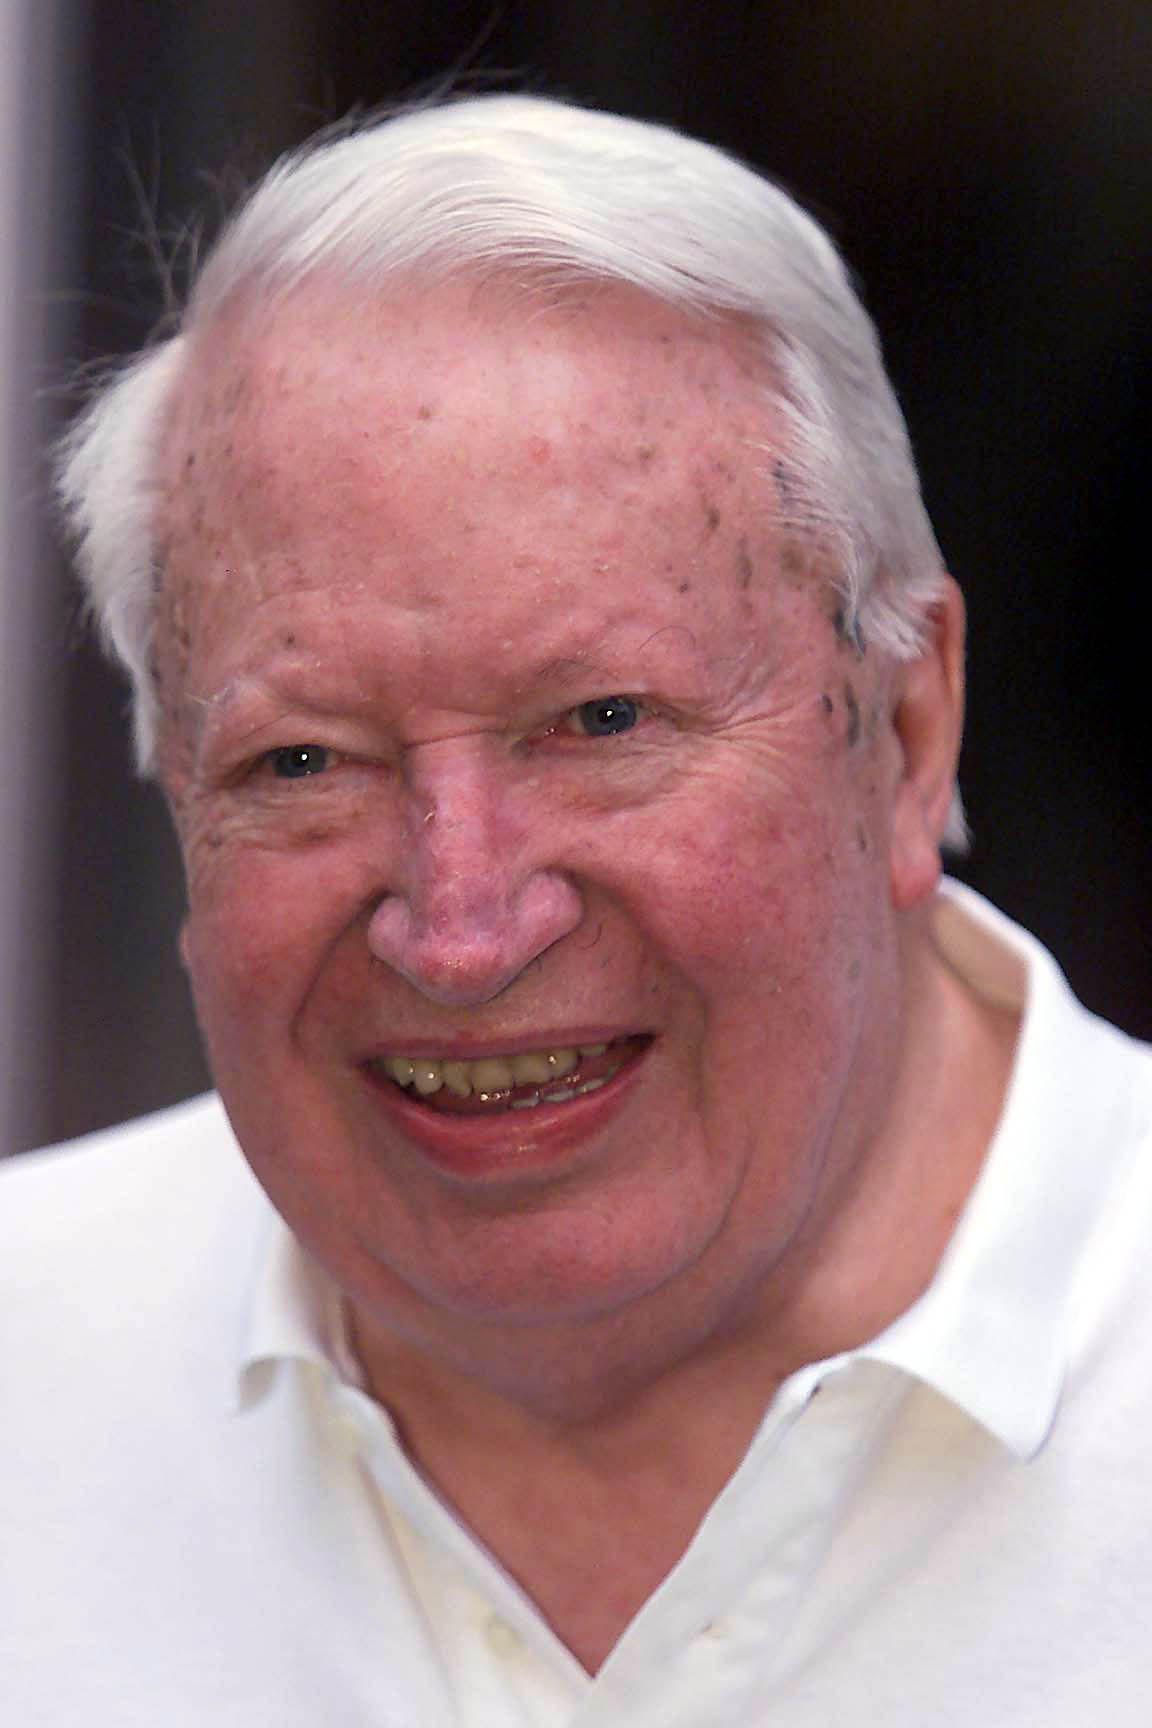 Two arrested over Edward Heath inquiry are released | Swindon Advertiser